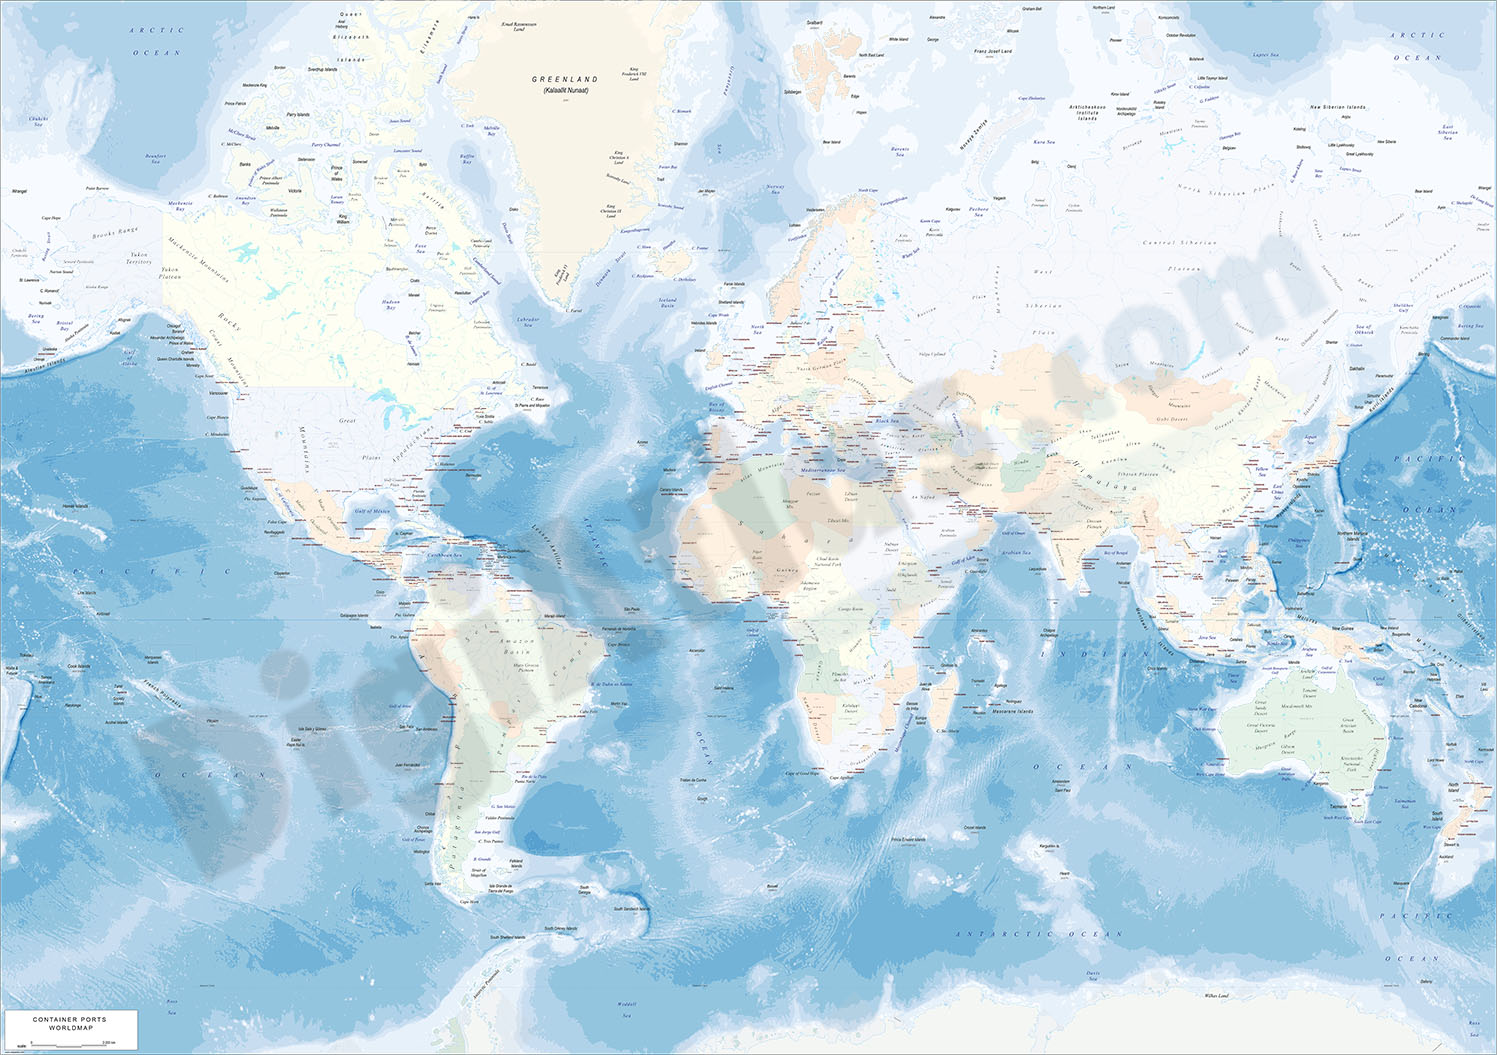 Physical-Political Worldmap with Container Ports